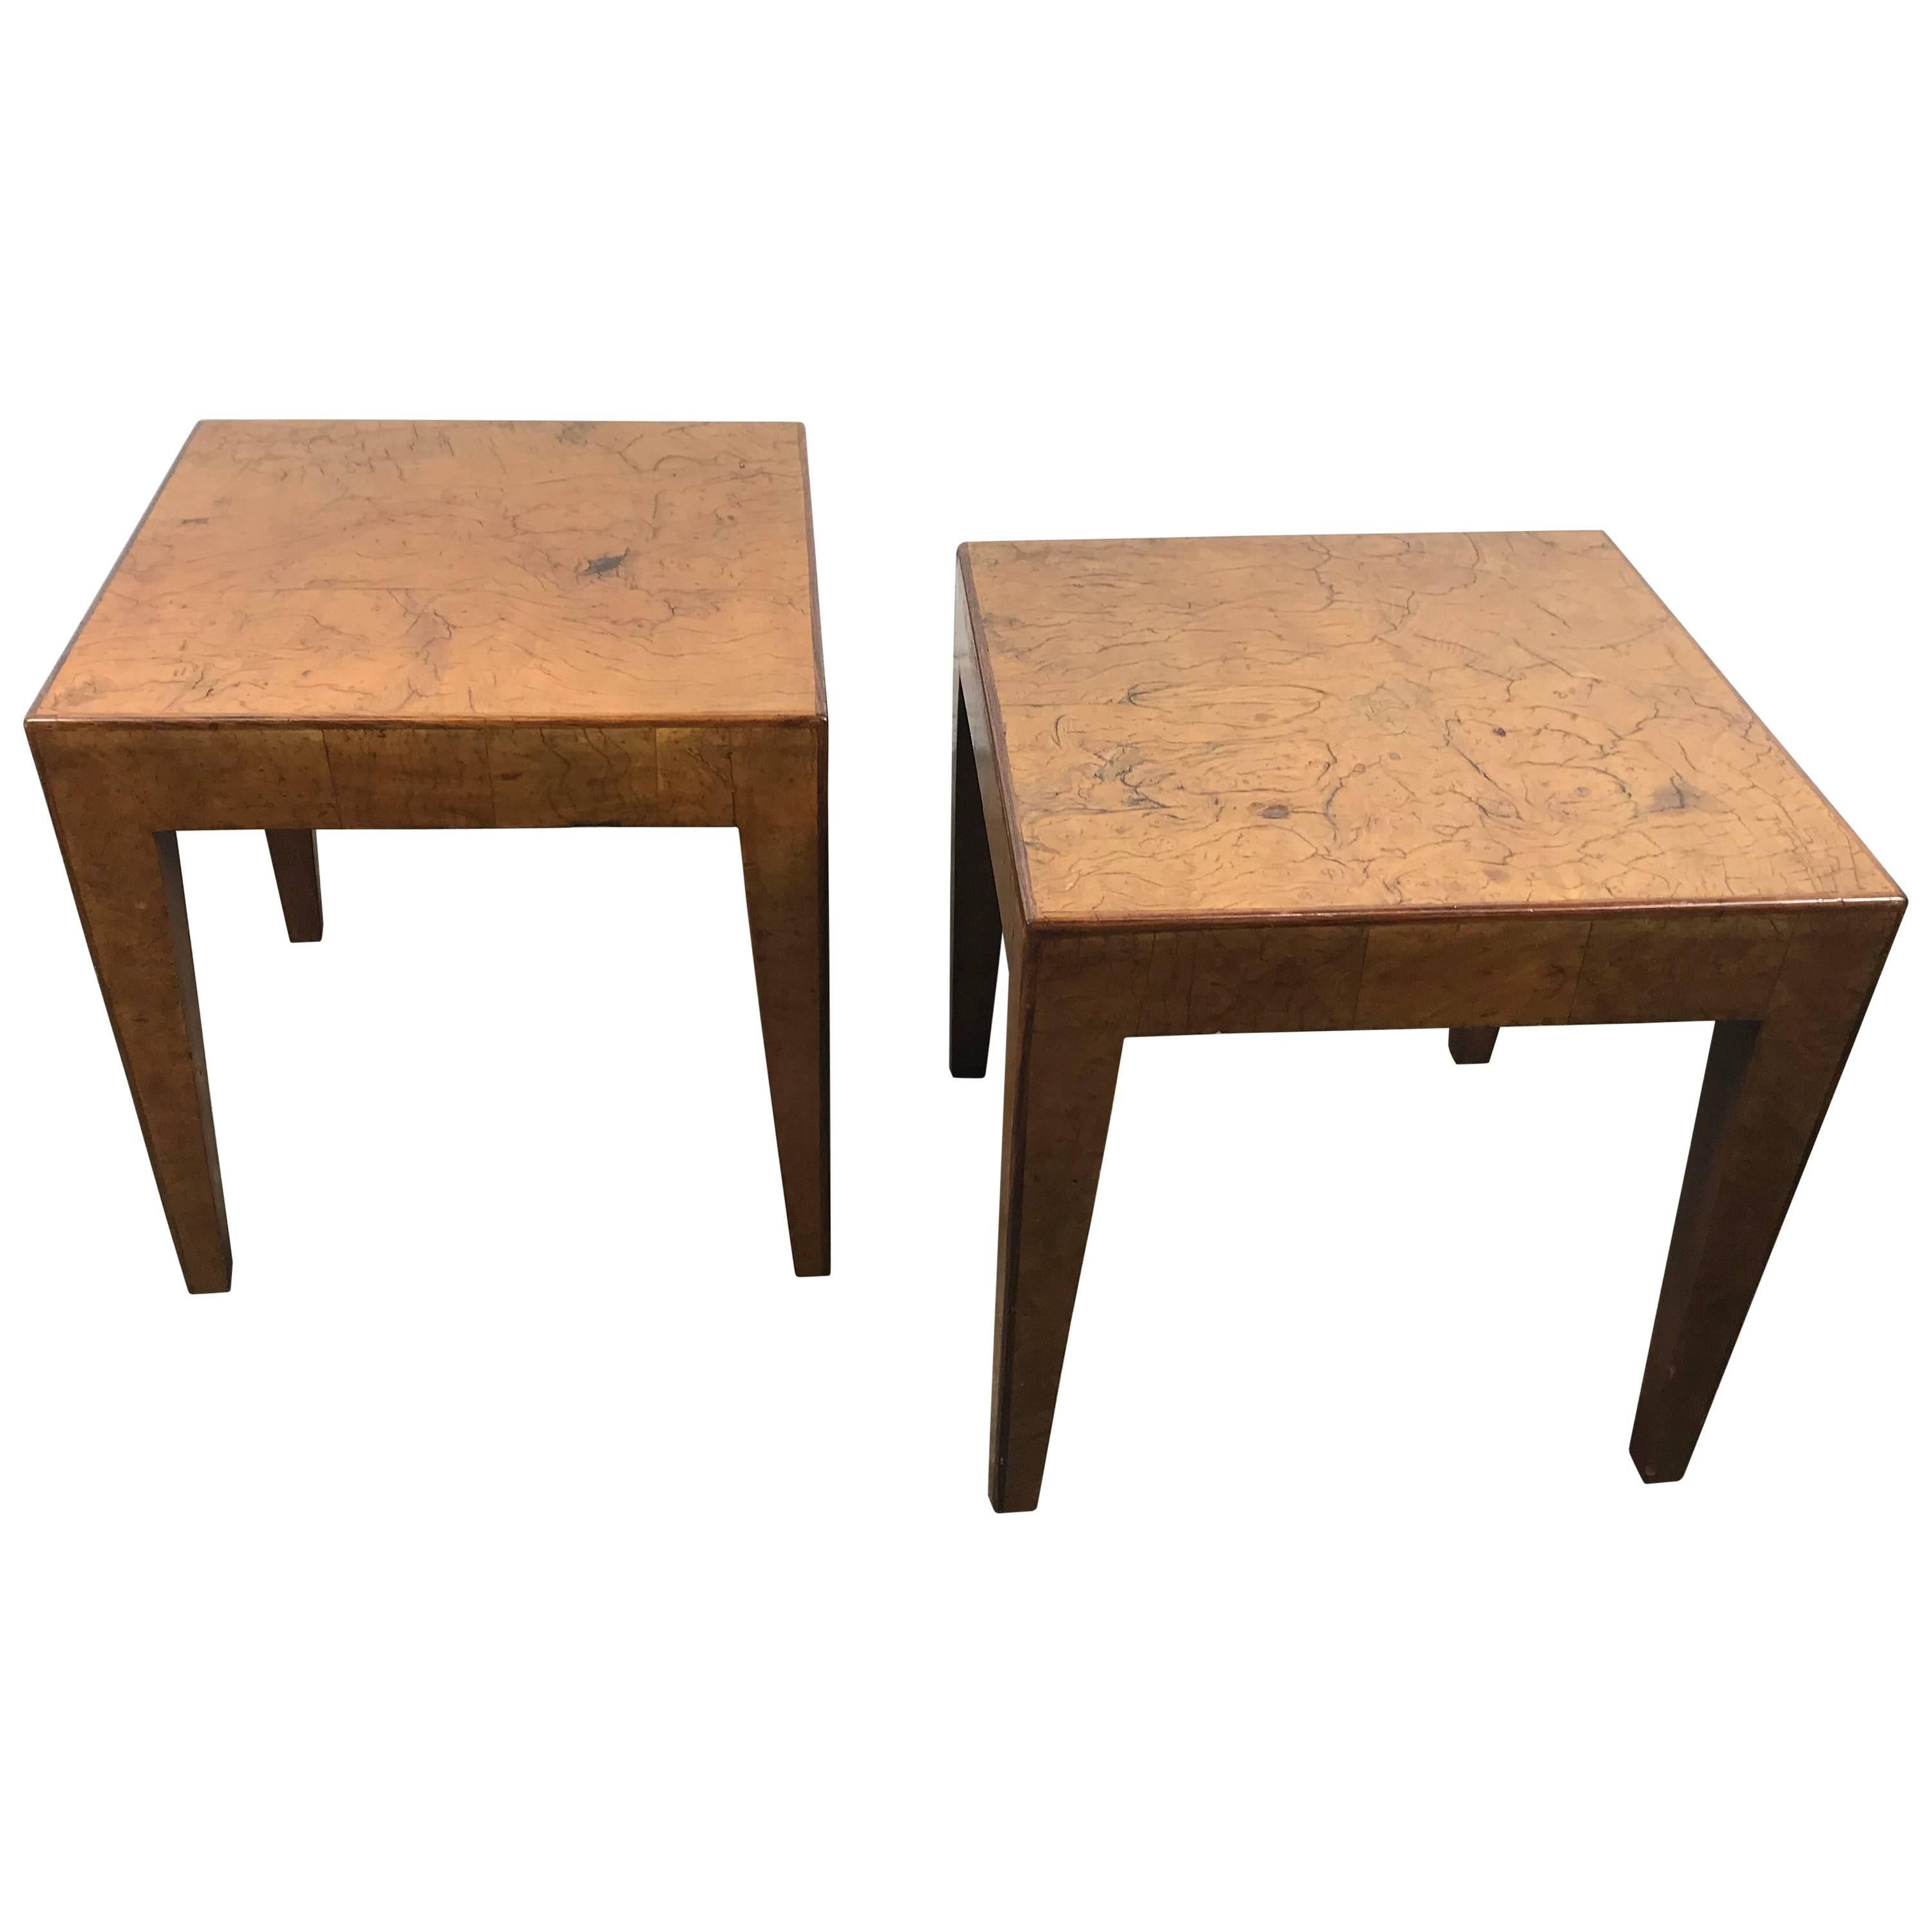 Pair of Elm Burl Wood Italian Modernist Tables 1940s after Willy Rizzo